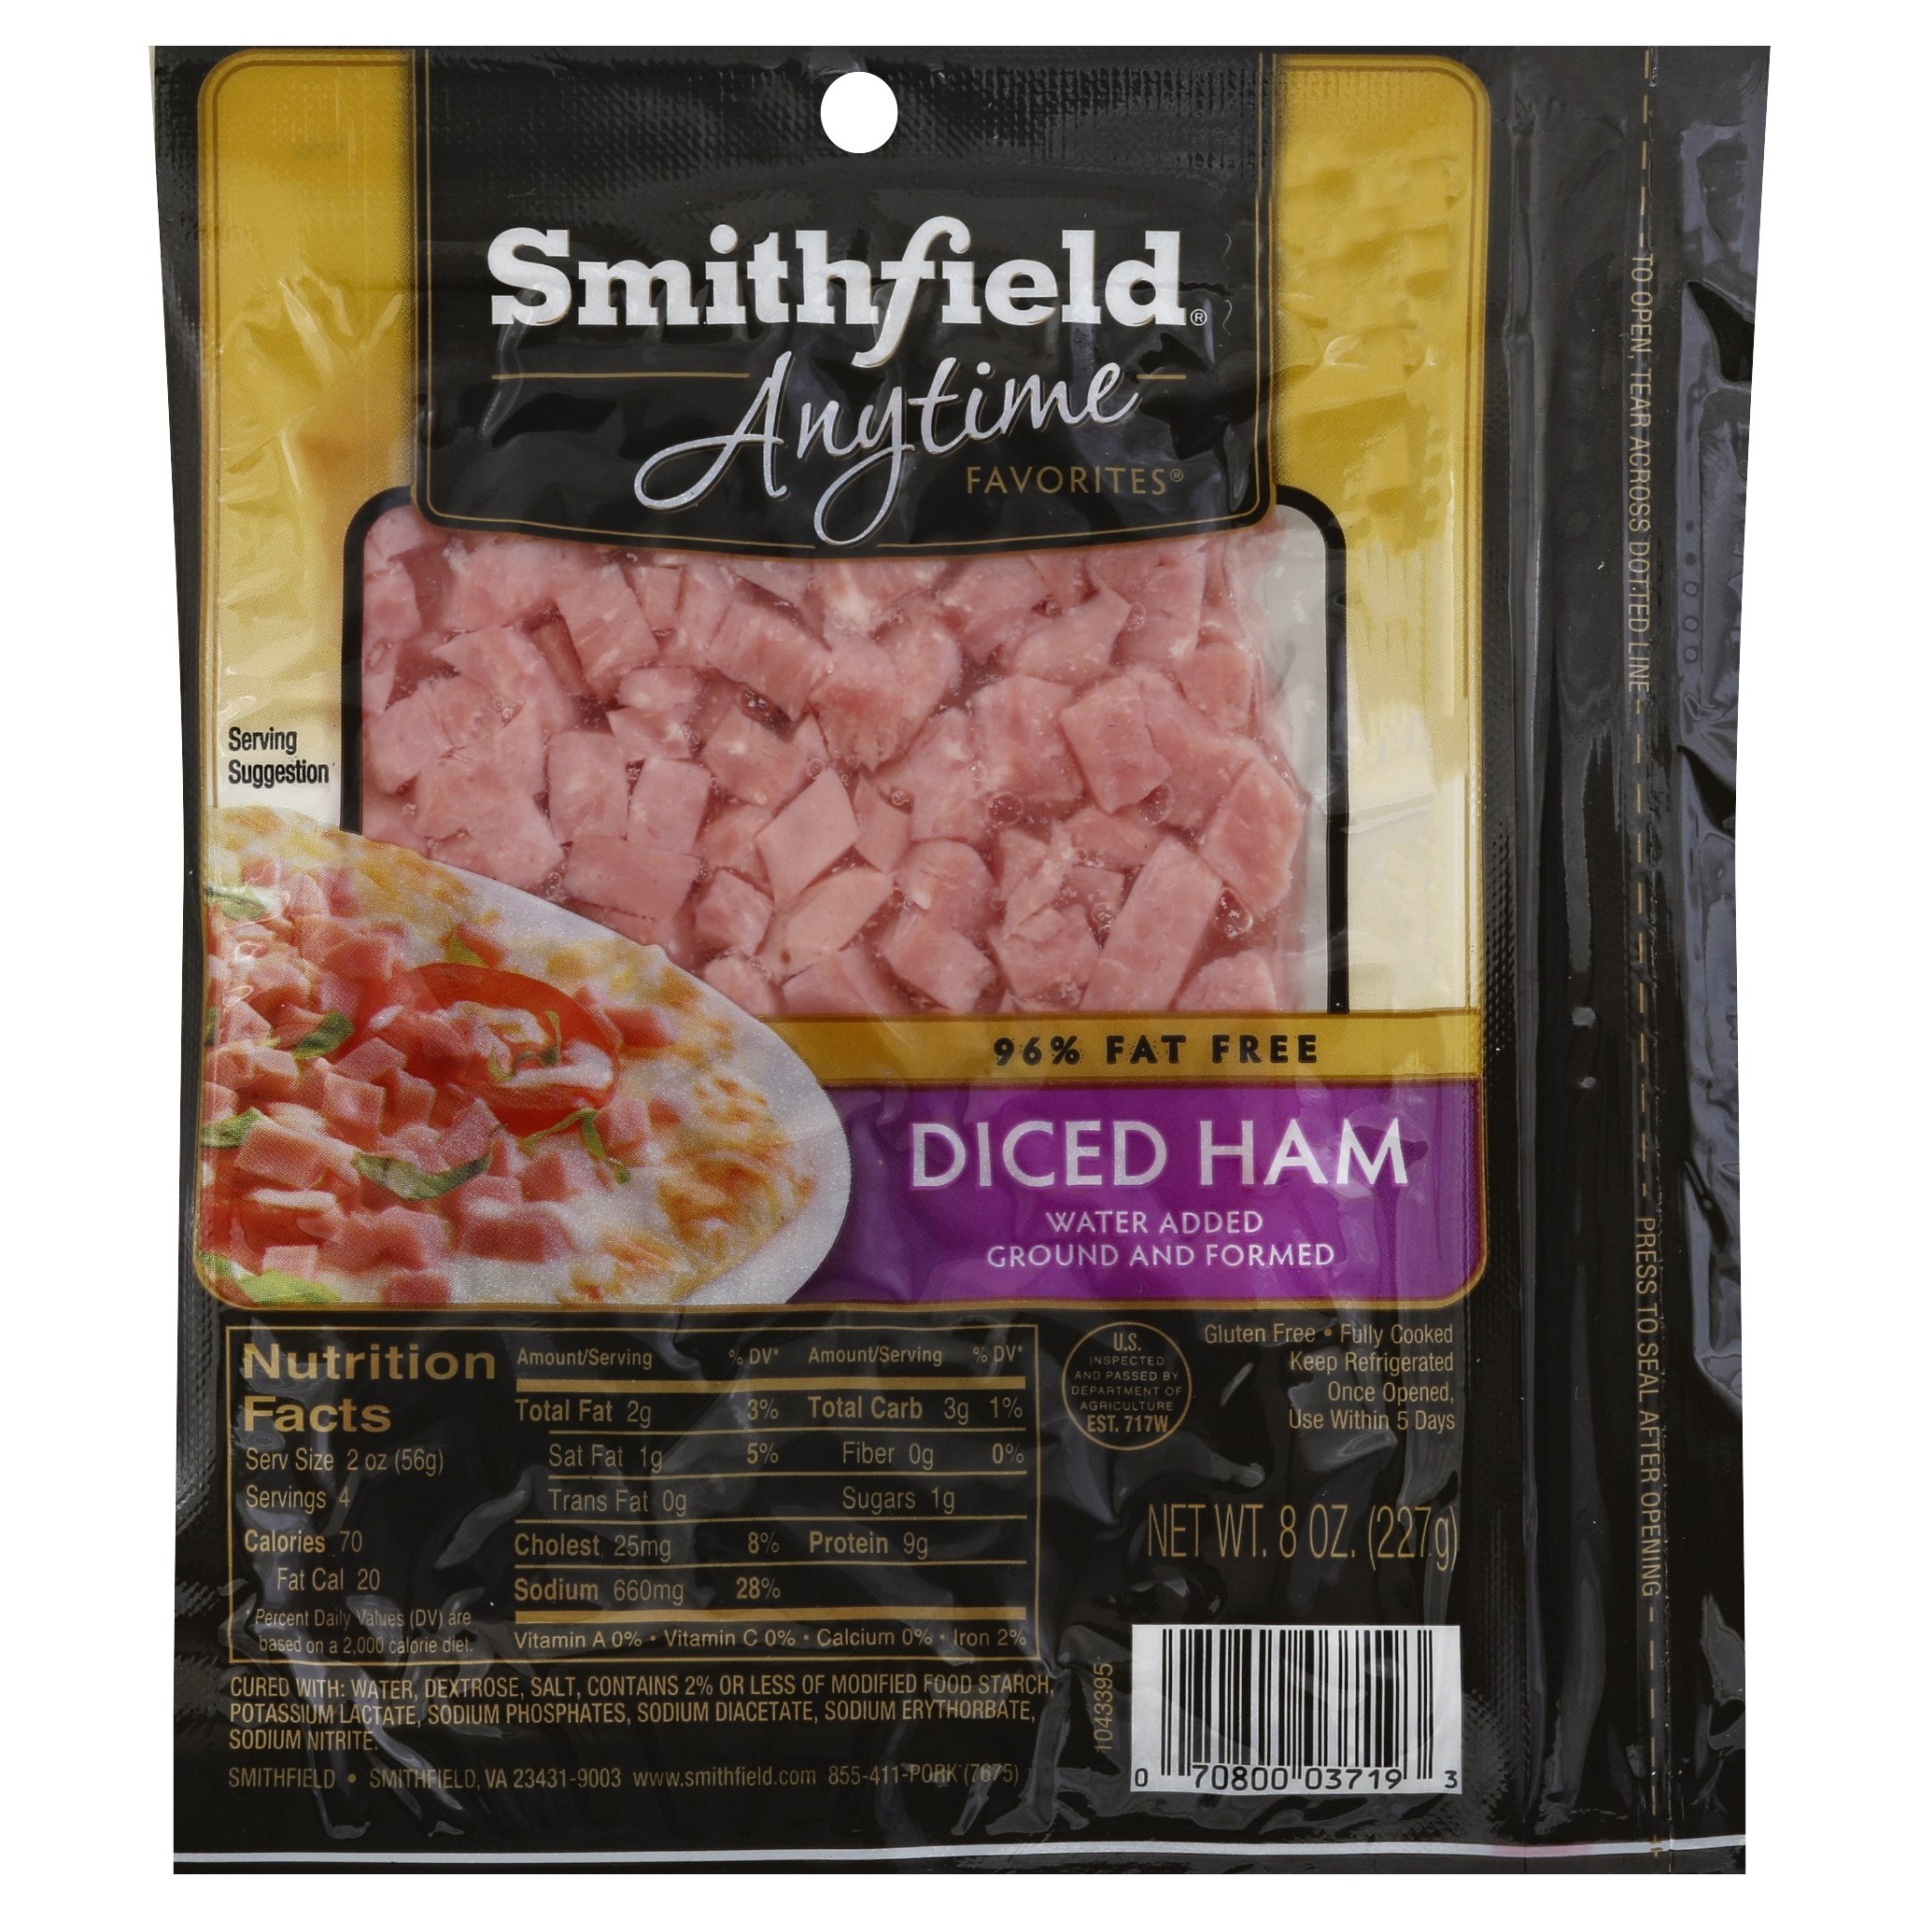 slide 1 of 3, Smithfield Anytime Favorites 95% Fat Free Water Added Diced Ham, 8 oz